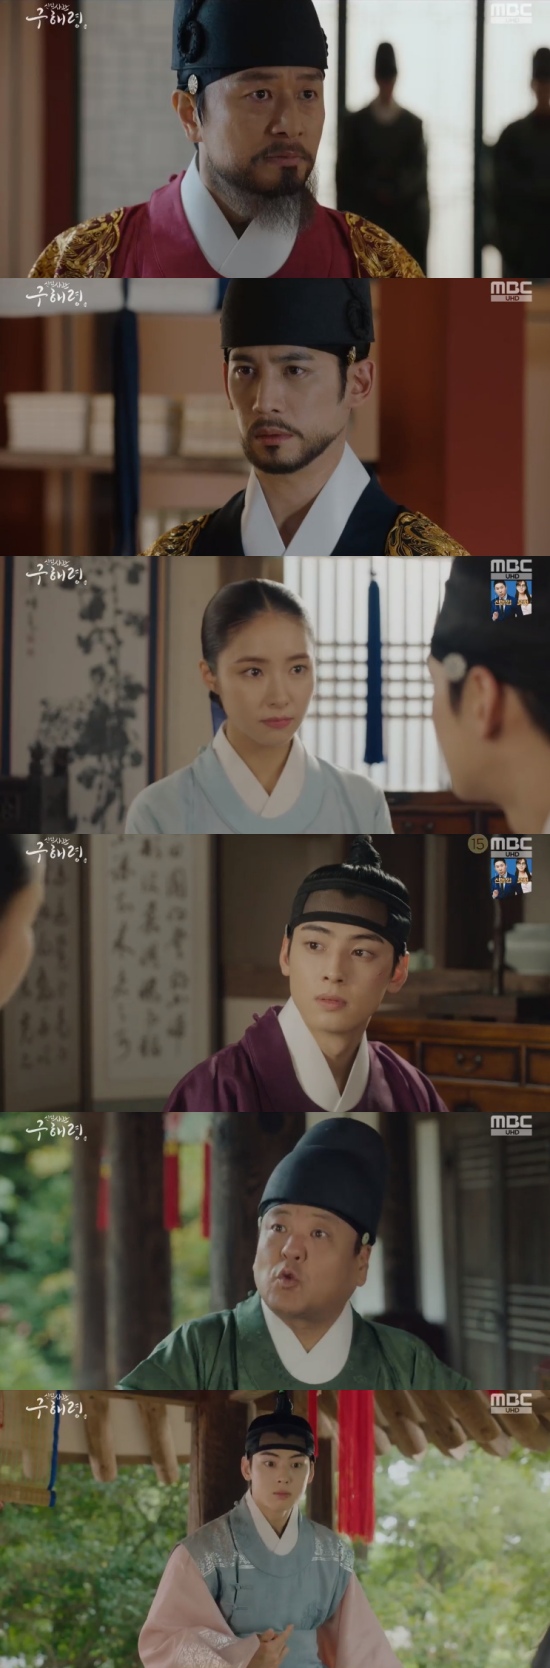 Newcomer Rookie Historian Goo Hae-ryung Cha Eun-woo and Shin Se-kyung are on the verge of separation.In the 27th and 28th episodes of MBCs New Entrance Officer Rookie Historian Goe-ryung broadcast on the 29th, Lee Rim (Cha Eun-woo) Rookie Historian Goo Hae-ryung (Shin Se-kyung) were depicted in a position to break up.On this day, Irim hid the transferor (Fabian) in the melted sugar, and Rookie Historian Goo Hae-ryung also helped escape.Before leaving, Rookie Historian Goo Hae-ryung wrote a letter to Confessions that he was not a merchant and came to Joseon to find his brother.Since then, Irim has been shocked to learn that those who have hidden it have been punished.Irim decided to reveal the truth to Itae even in the dissuade of Heo Sam-bo (Seong Ji-ru), and said, If I do nothing, seventy-three people die.I have been hiding quietly in the rusty hall for the rest of my life, and I will not live like that anymore. Rookie Historian Goo Hae-ryung followed Lee Lim, saying, Let me go with you, and eventually Lee Lim and Rookie Historian Goo Hae-ryung met Lee Tae.Lee said, I am the one I am looking for in the money department.I helped the transferee, and Rookie Historian Goo Hae-ryung recorded the conversation between Irim and Itae.Itae ordered Irim to hide the truth, and if it is revealed, he threatened to kill all those who knew the truth, including Rookie Historian Goo Hae-ryung.Lee Jin (Park Ki-woong) also rebelled against Lee Tae, and when he came to Dae-han Lim (Kim Yeo-jin), Lee Tae ordered the people to be executed.Rookie Historian Goo Hae-ryung also expressed his affection for Is everything okay? And Lee said, Please tell me I did well.I think I can just say that. Rookie Historian Goo Hae-ryung approached Irim and tapped his shoulder saying, You did well. However, Itae set up a ritual to marry Irim, and increased the tension of the drama whether Irim would marry another person in a situation where Irim liked each other with Rookie Historian Goo Hae-ryung.Photo = MBC Broadcasting Screen